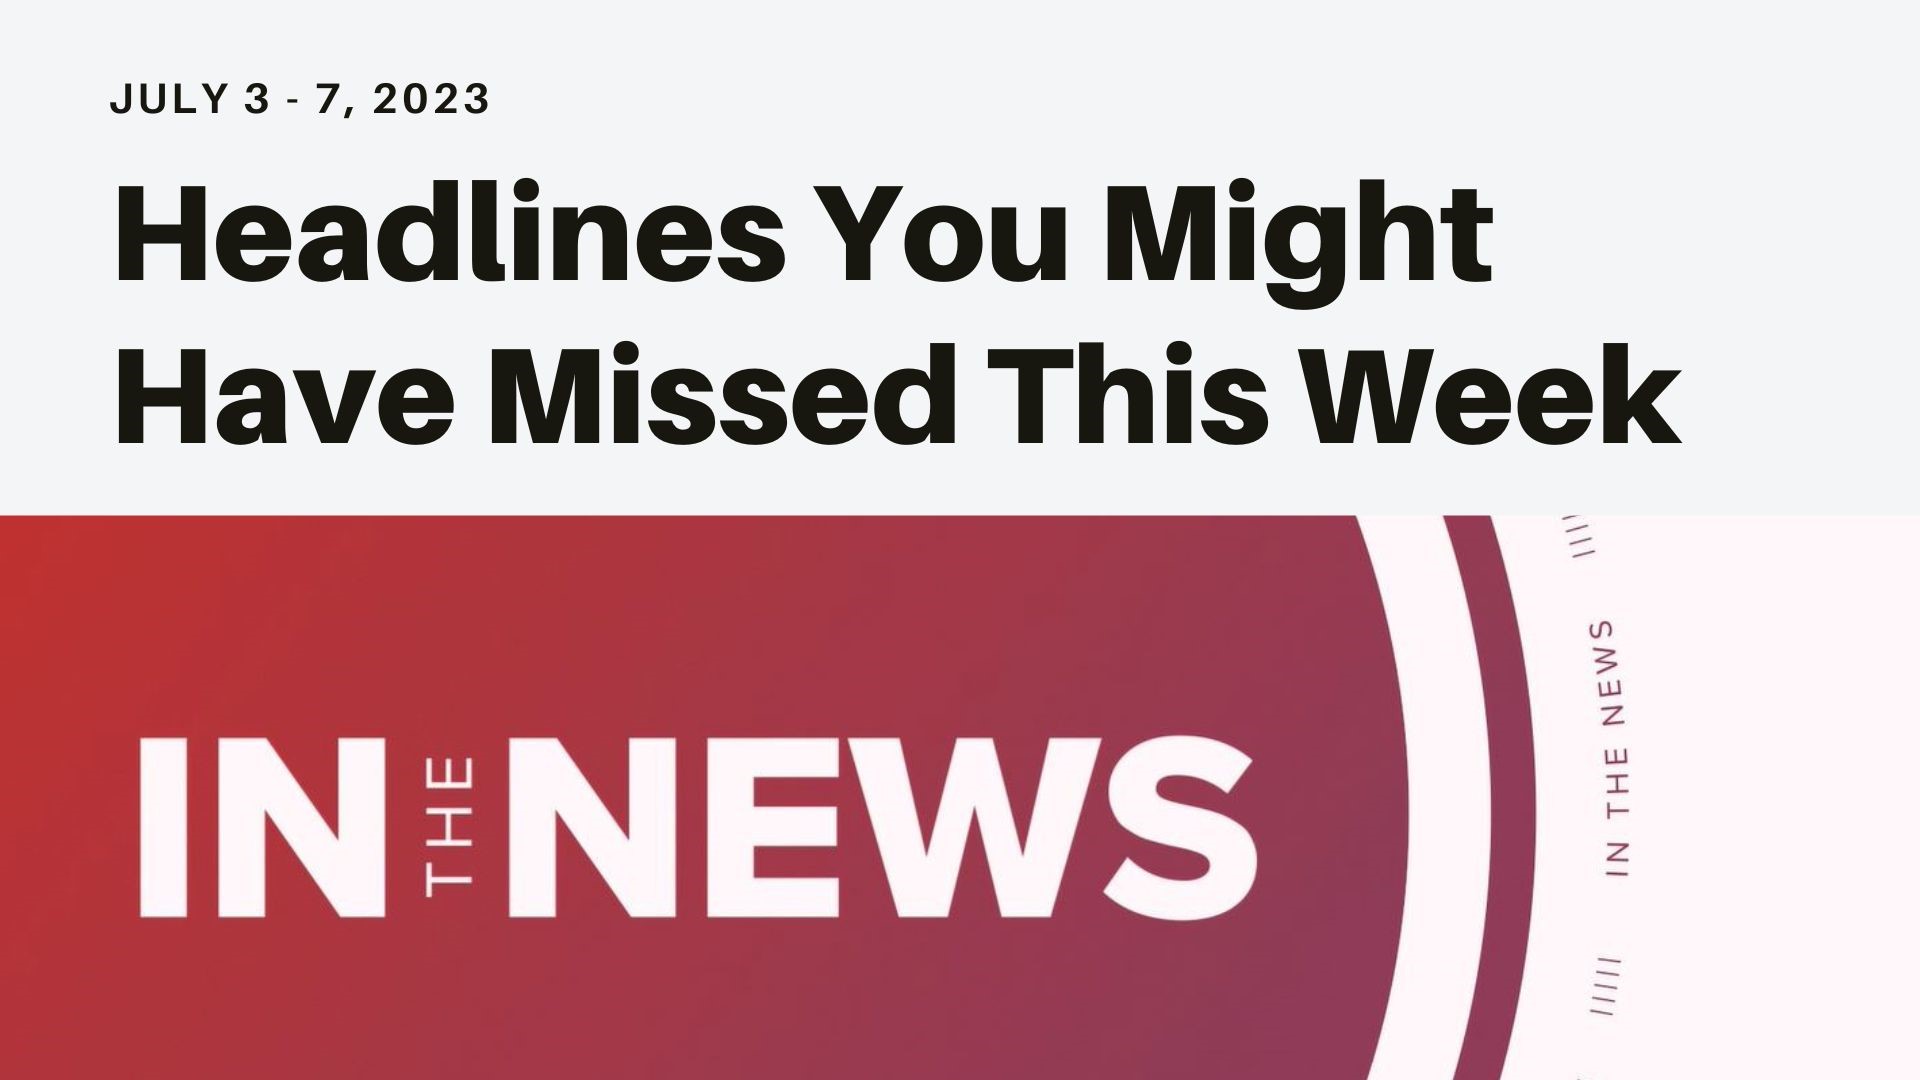 A look at some of the top headlines you might have missed this week from the FDA approving a new Alzheimer's drug to a warning about U.S. tap water and more.